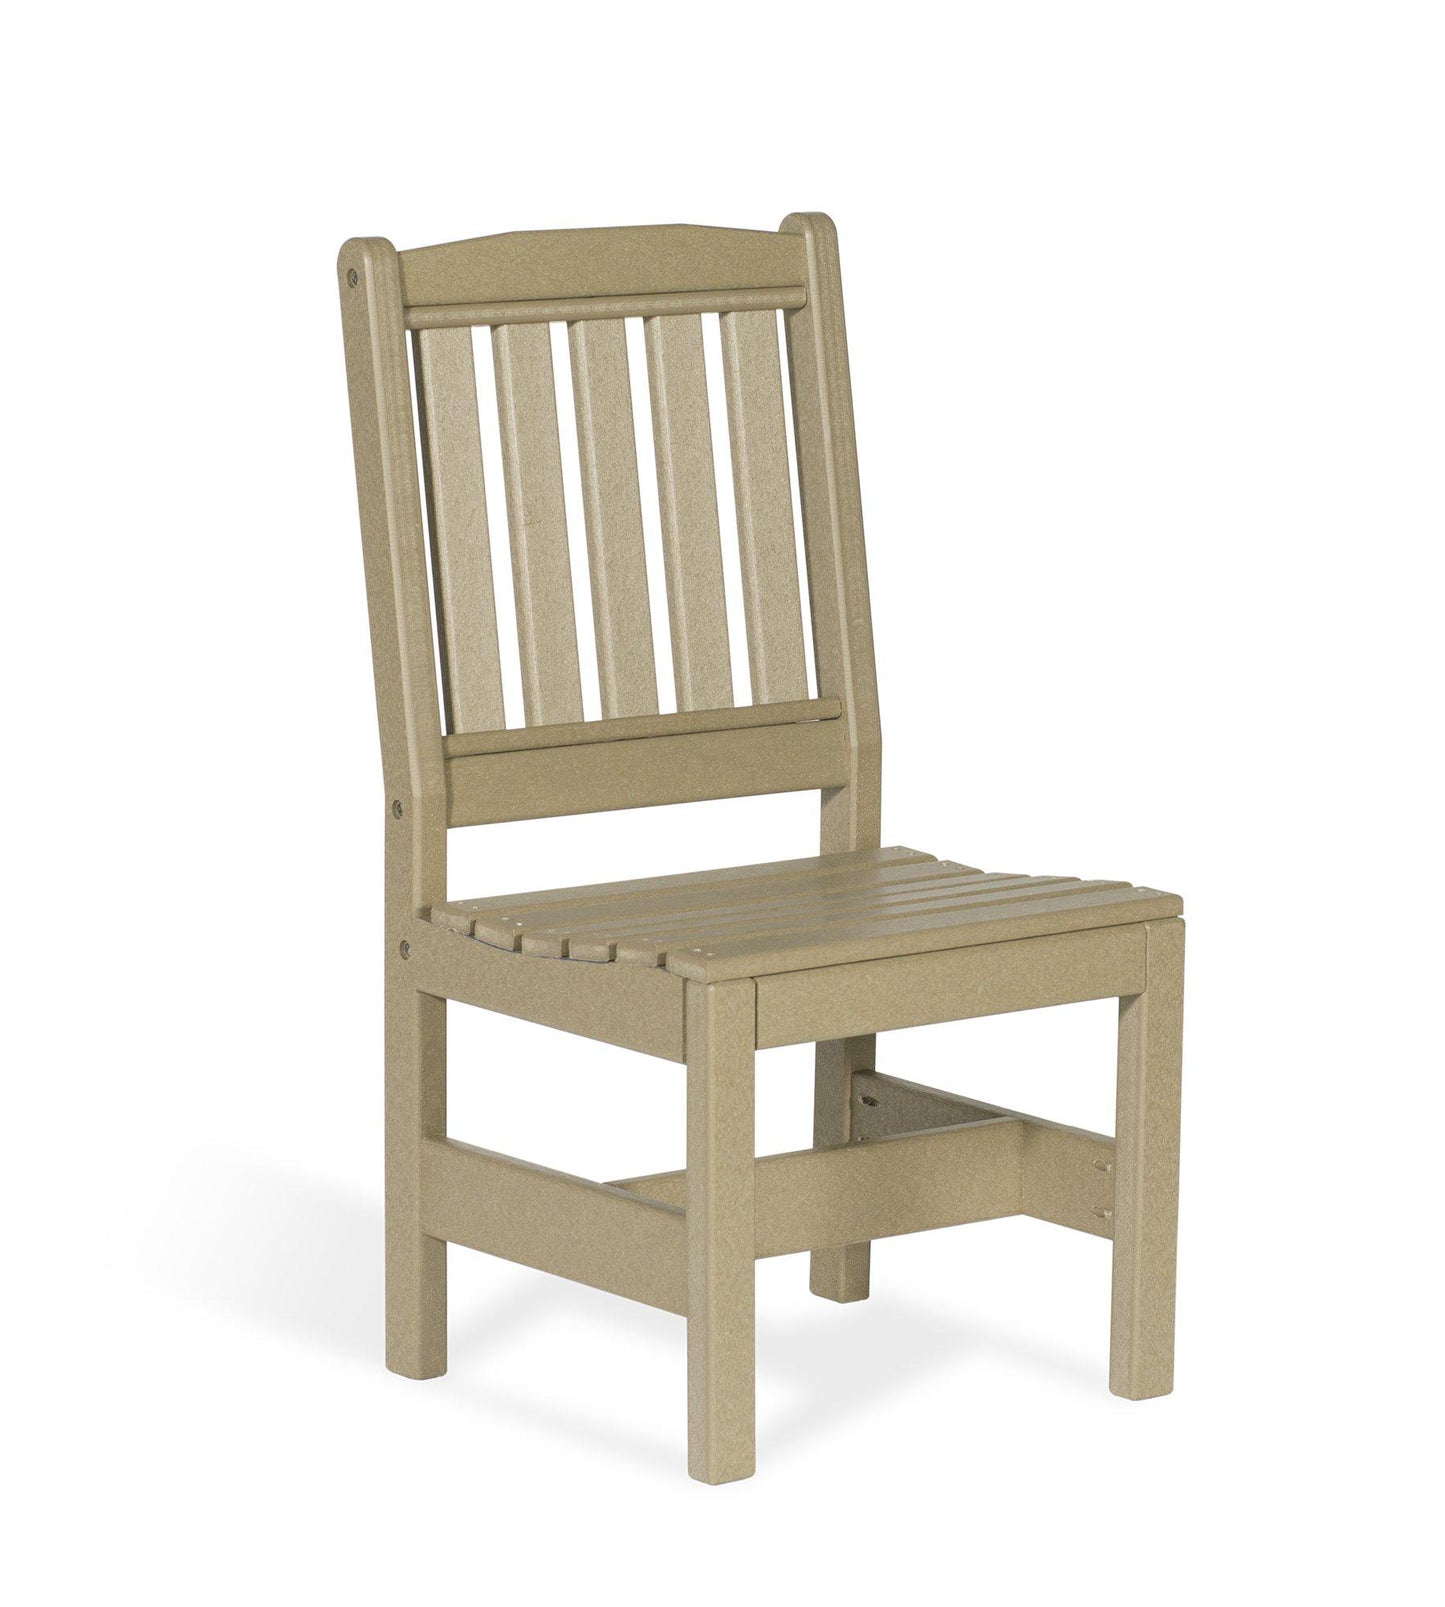 Leisure Lawns Amish Made Recycled Plastic English Garden Side Chair (Dining Height) Model #220D - LEAD TIME TO SHIP 4 WEEKS OR LESS